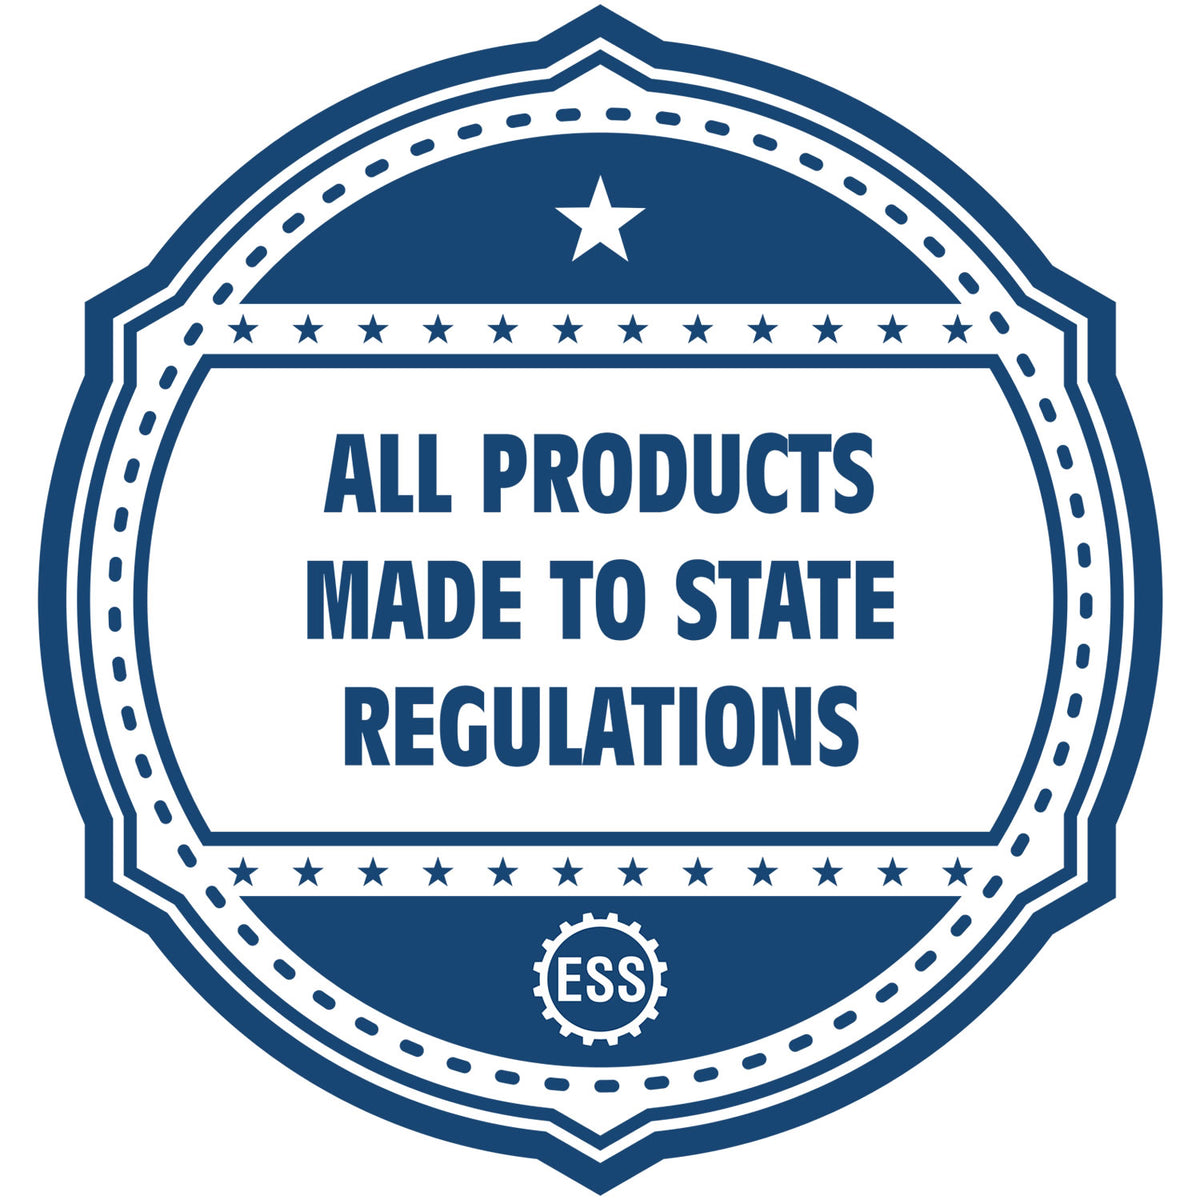 A blue icon or badge for the Gift Michigan Engineer Seal showing that this product is made in compliance with state regulations.